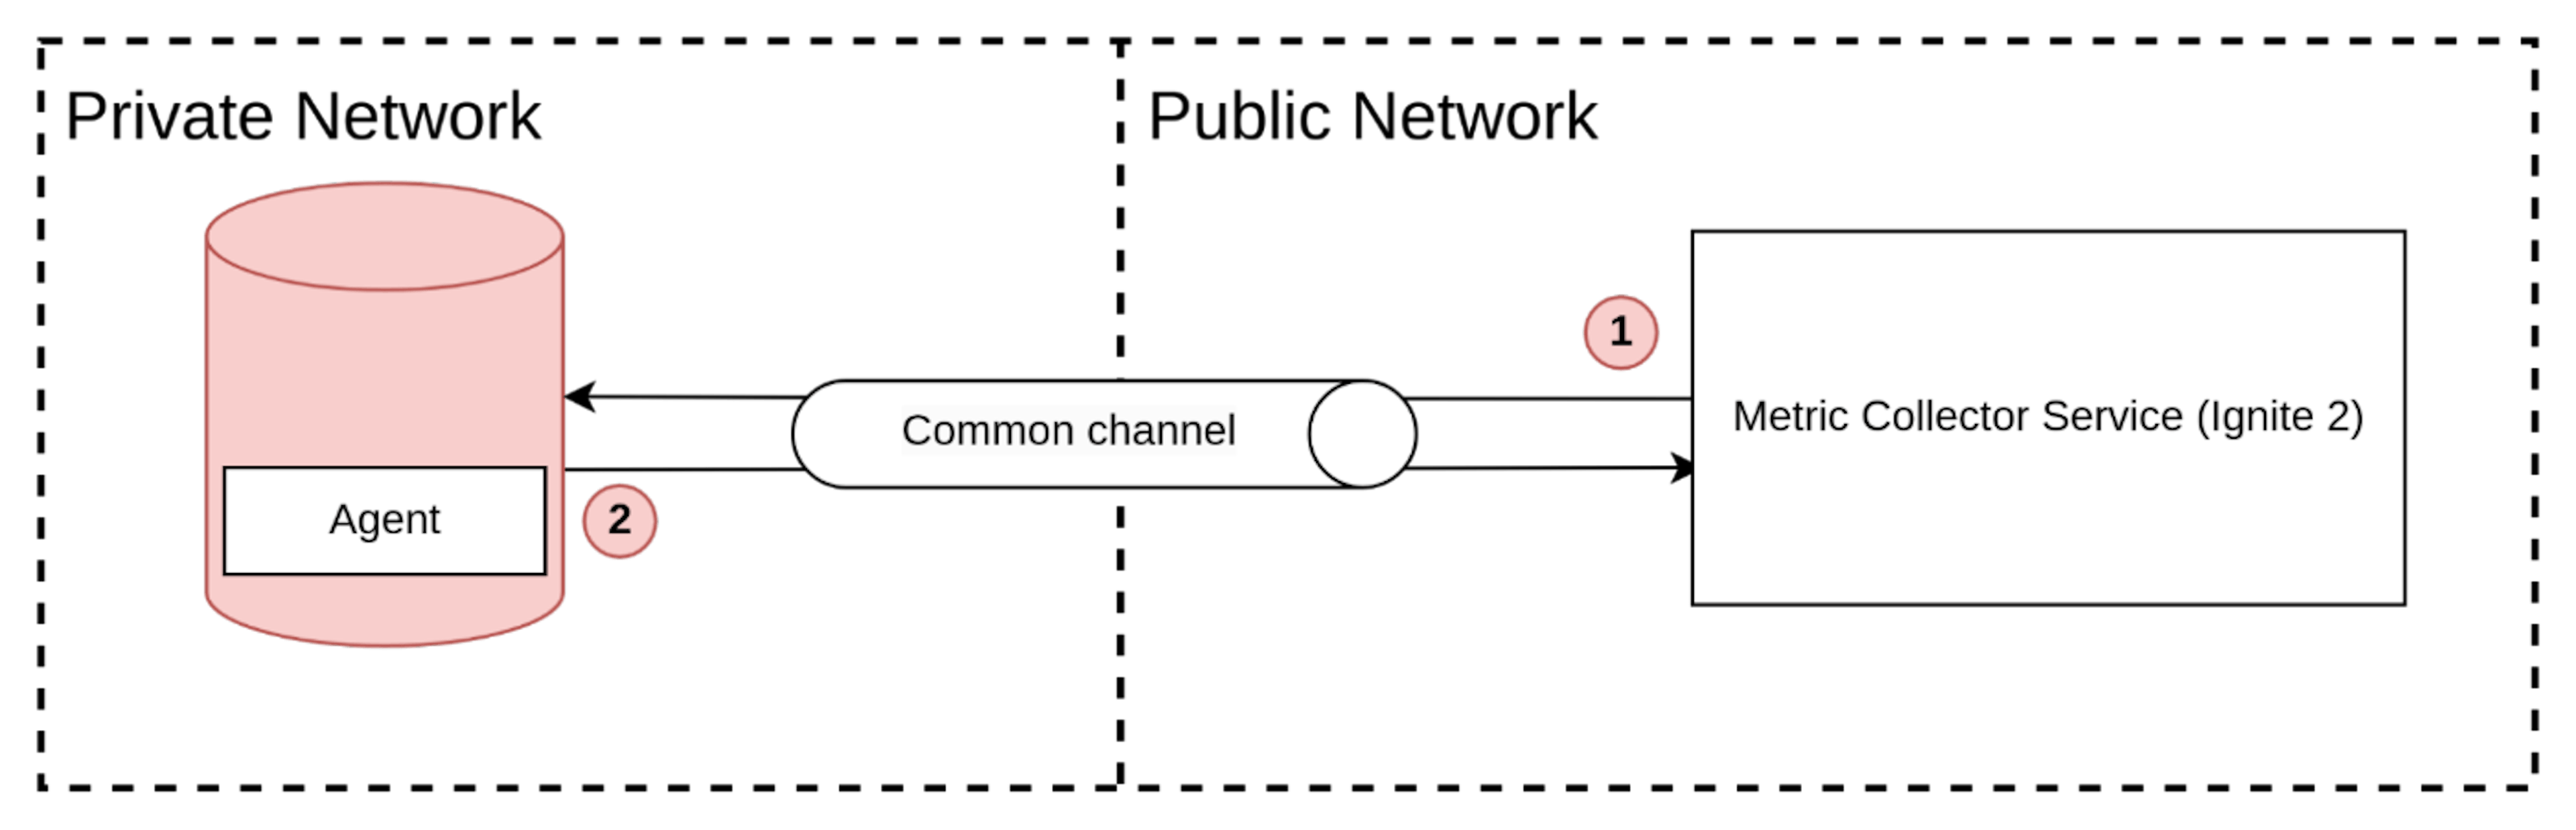 Pic 9. Private network interaction.